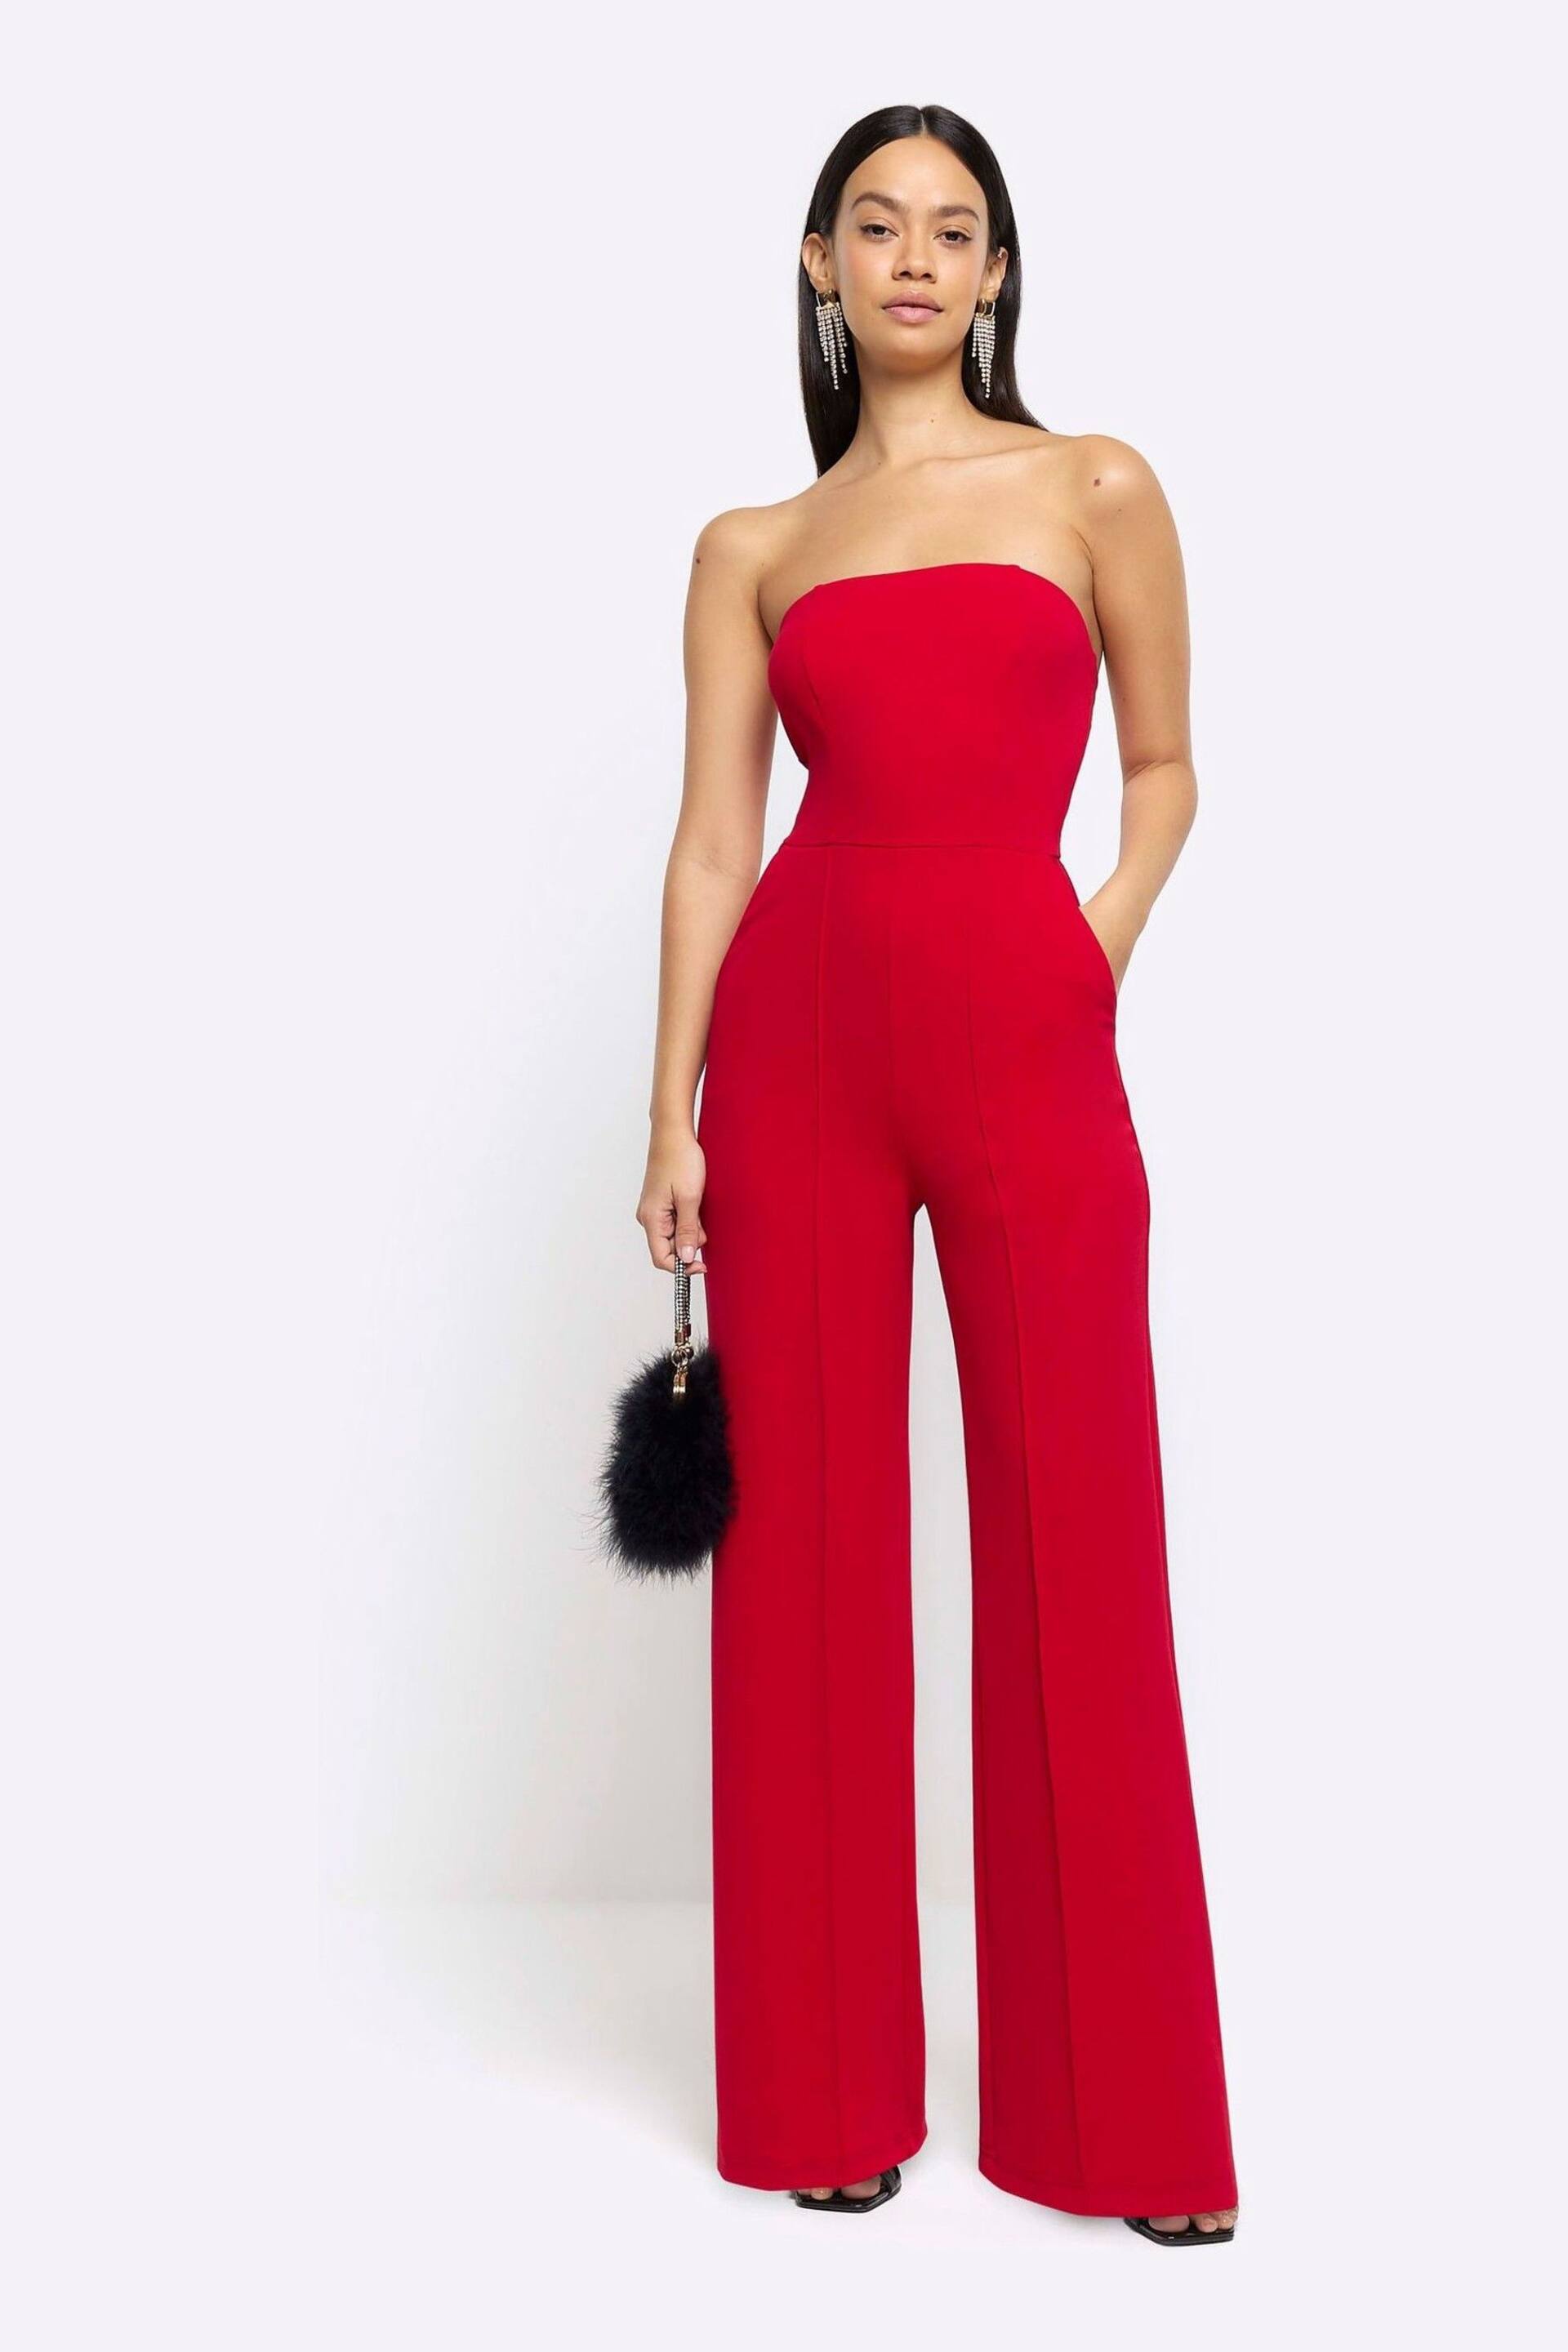 River Island Red Bardot Corset Jumpsuit - Image 1 of 4